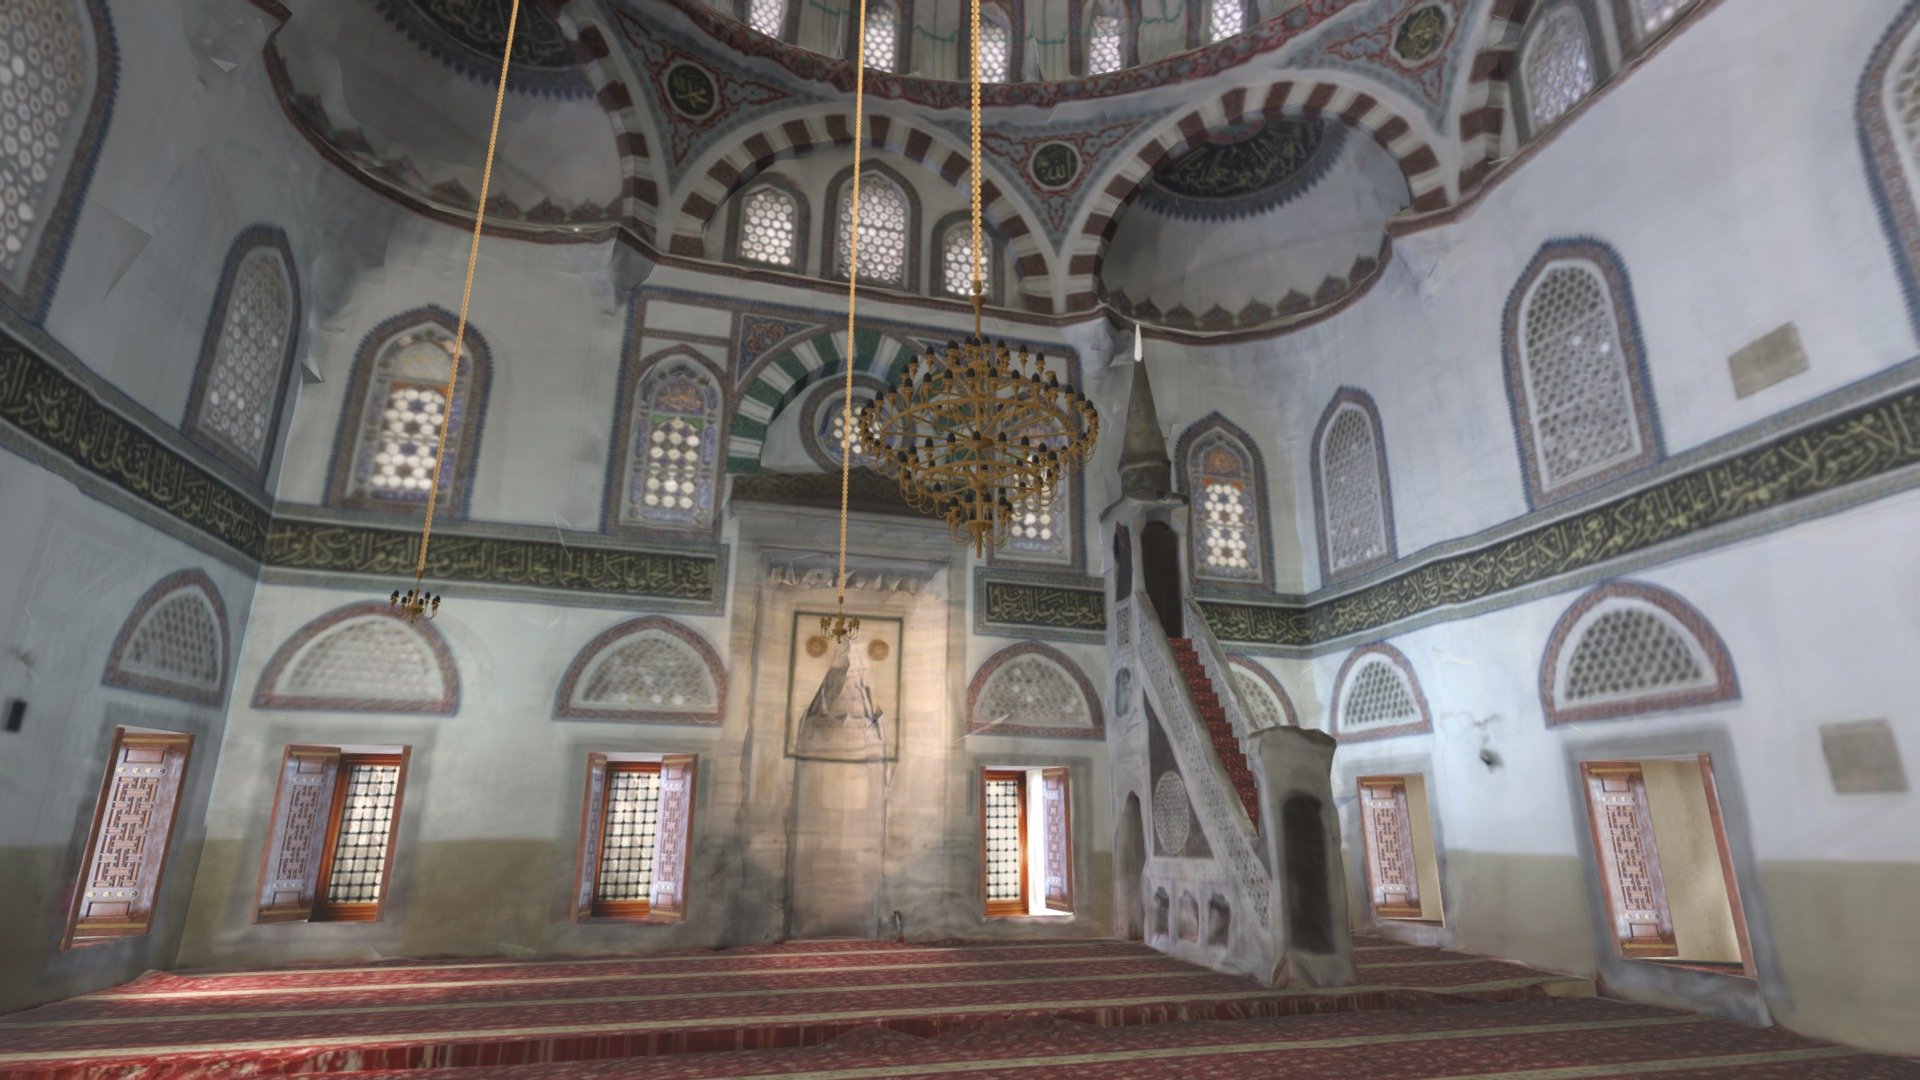 Located in Izmit Turkey, this model is a post-processed version of a photogrammetry scan. Completed in 2015-16 while working at Ball State University's Institue for Digital Intermedia Arts (IDIA) Lab. 

Read more about the project here:
http://idialab.org/photogrammetry-mosque/ - Photogrammetry scan of Pertev Pasa Mosque - 3D model by ckharrison10 3d model